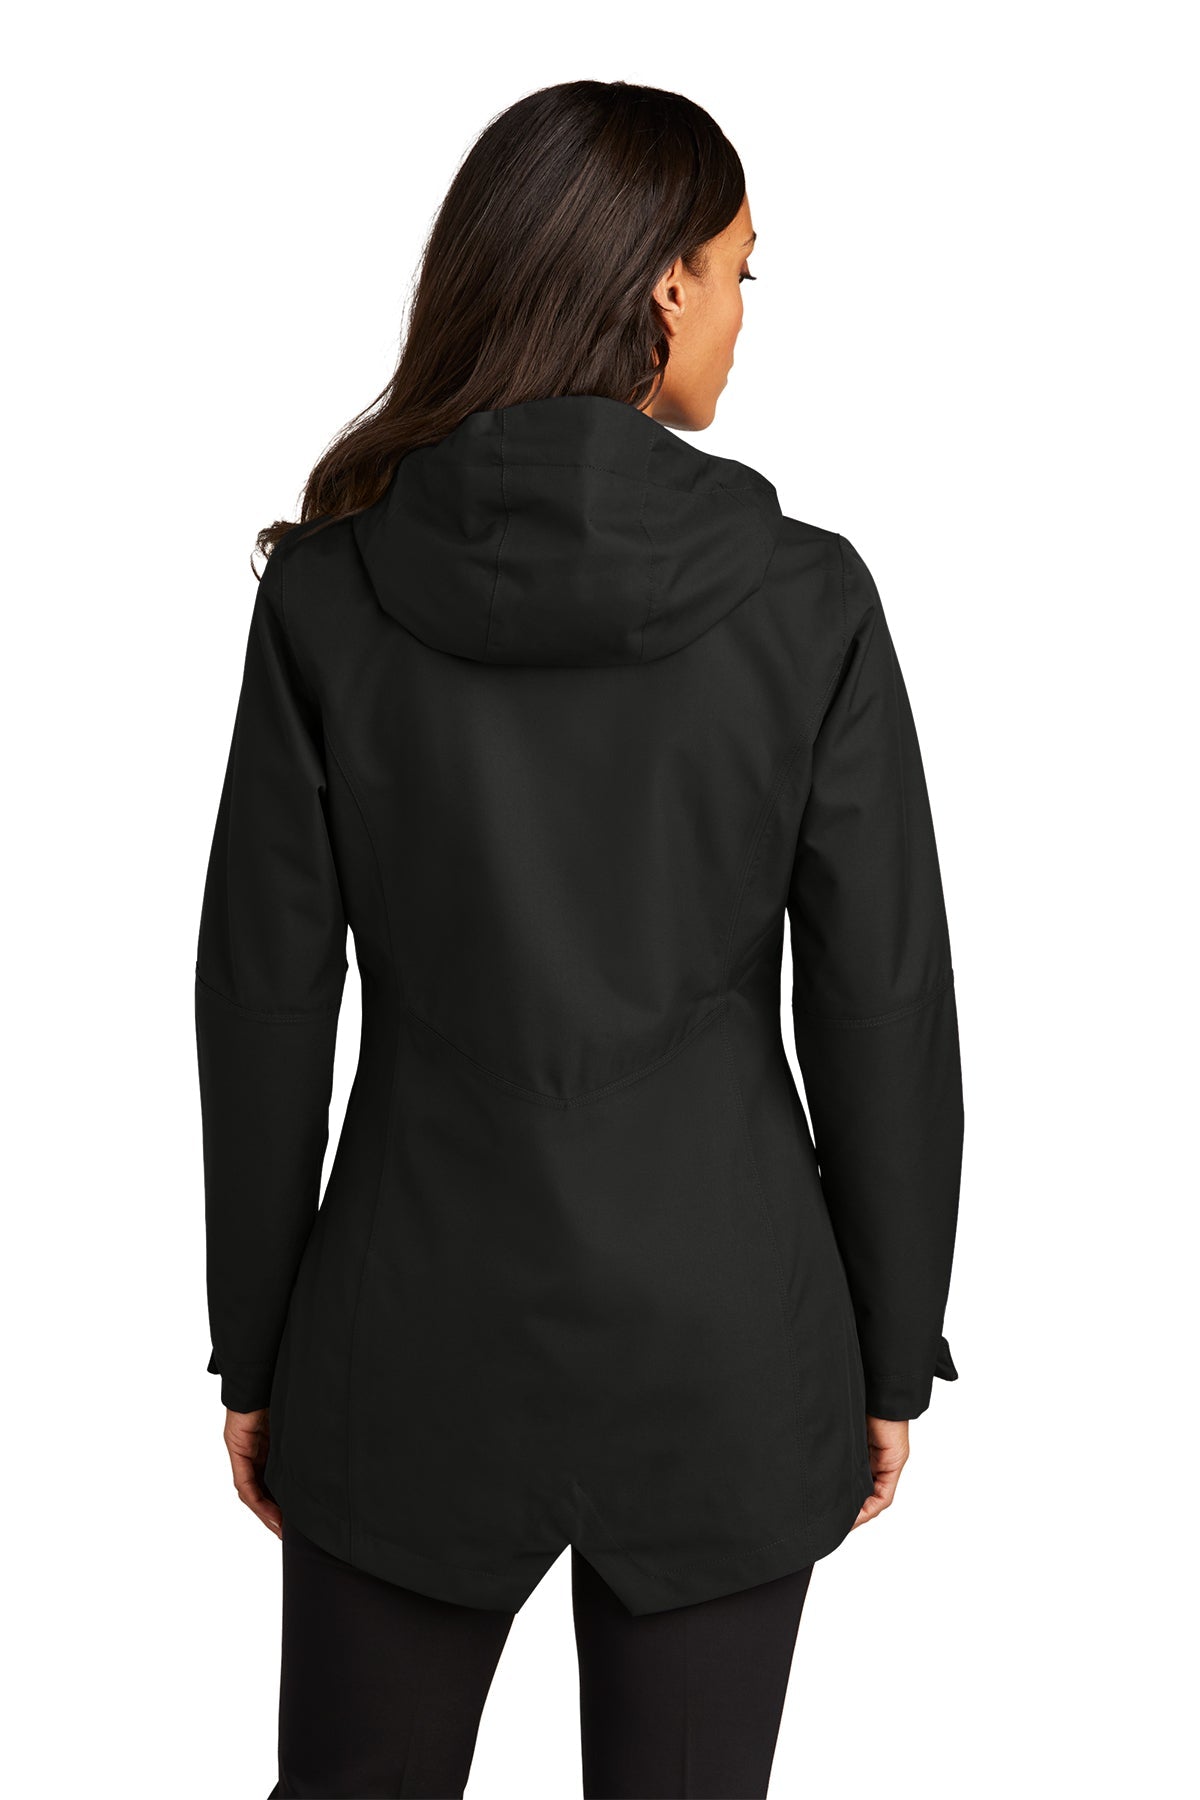 Port Authority Ladies Collective Customized Outer Shell Jackets, Deep Black